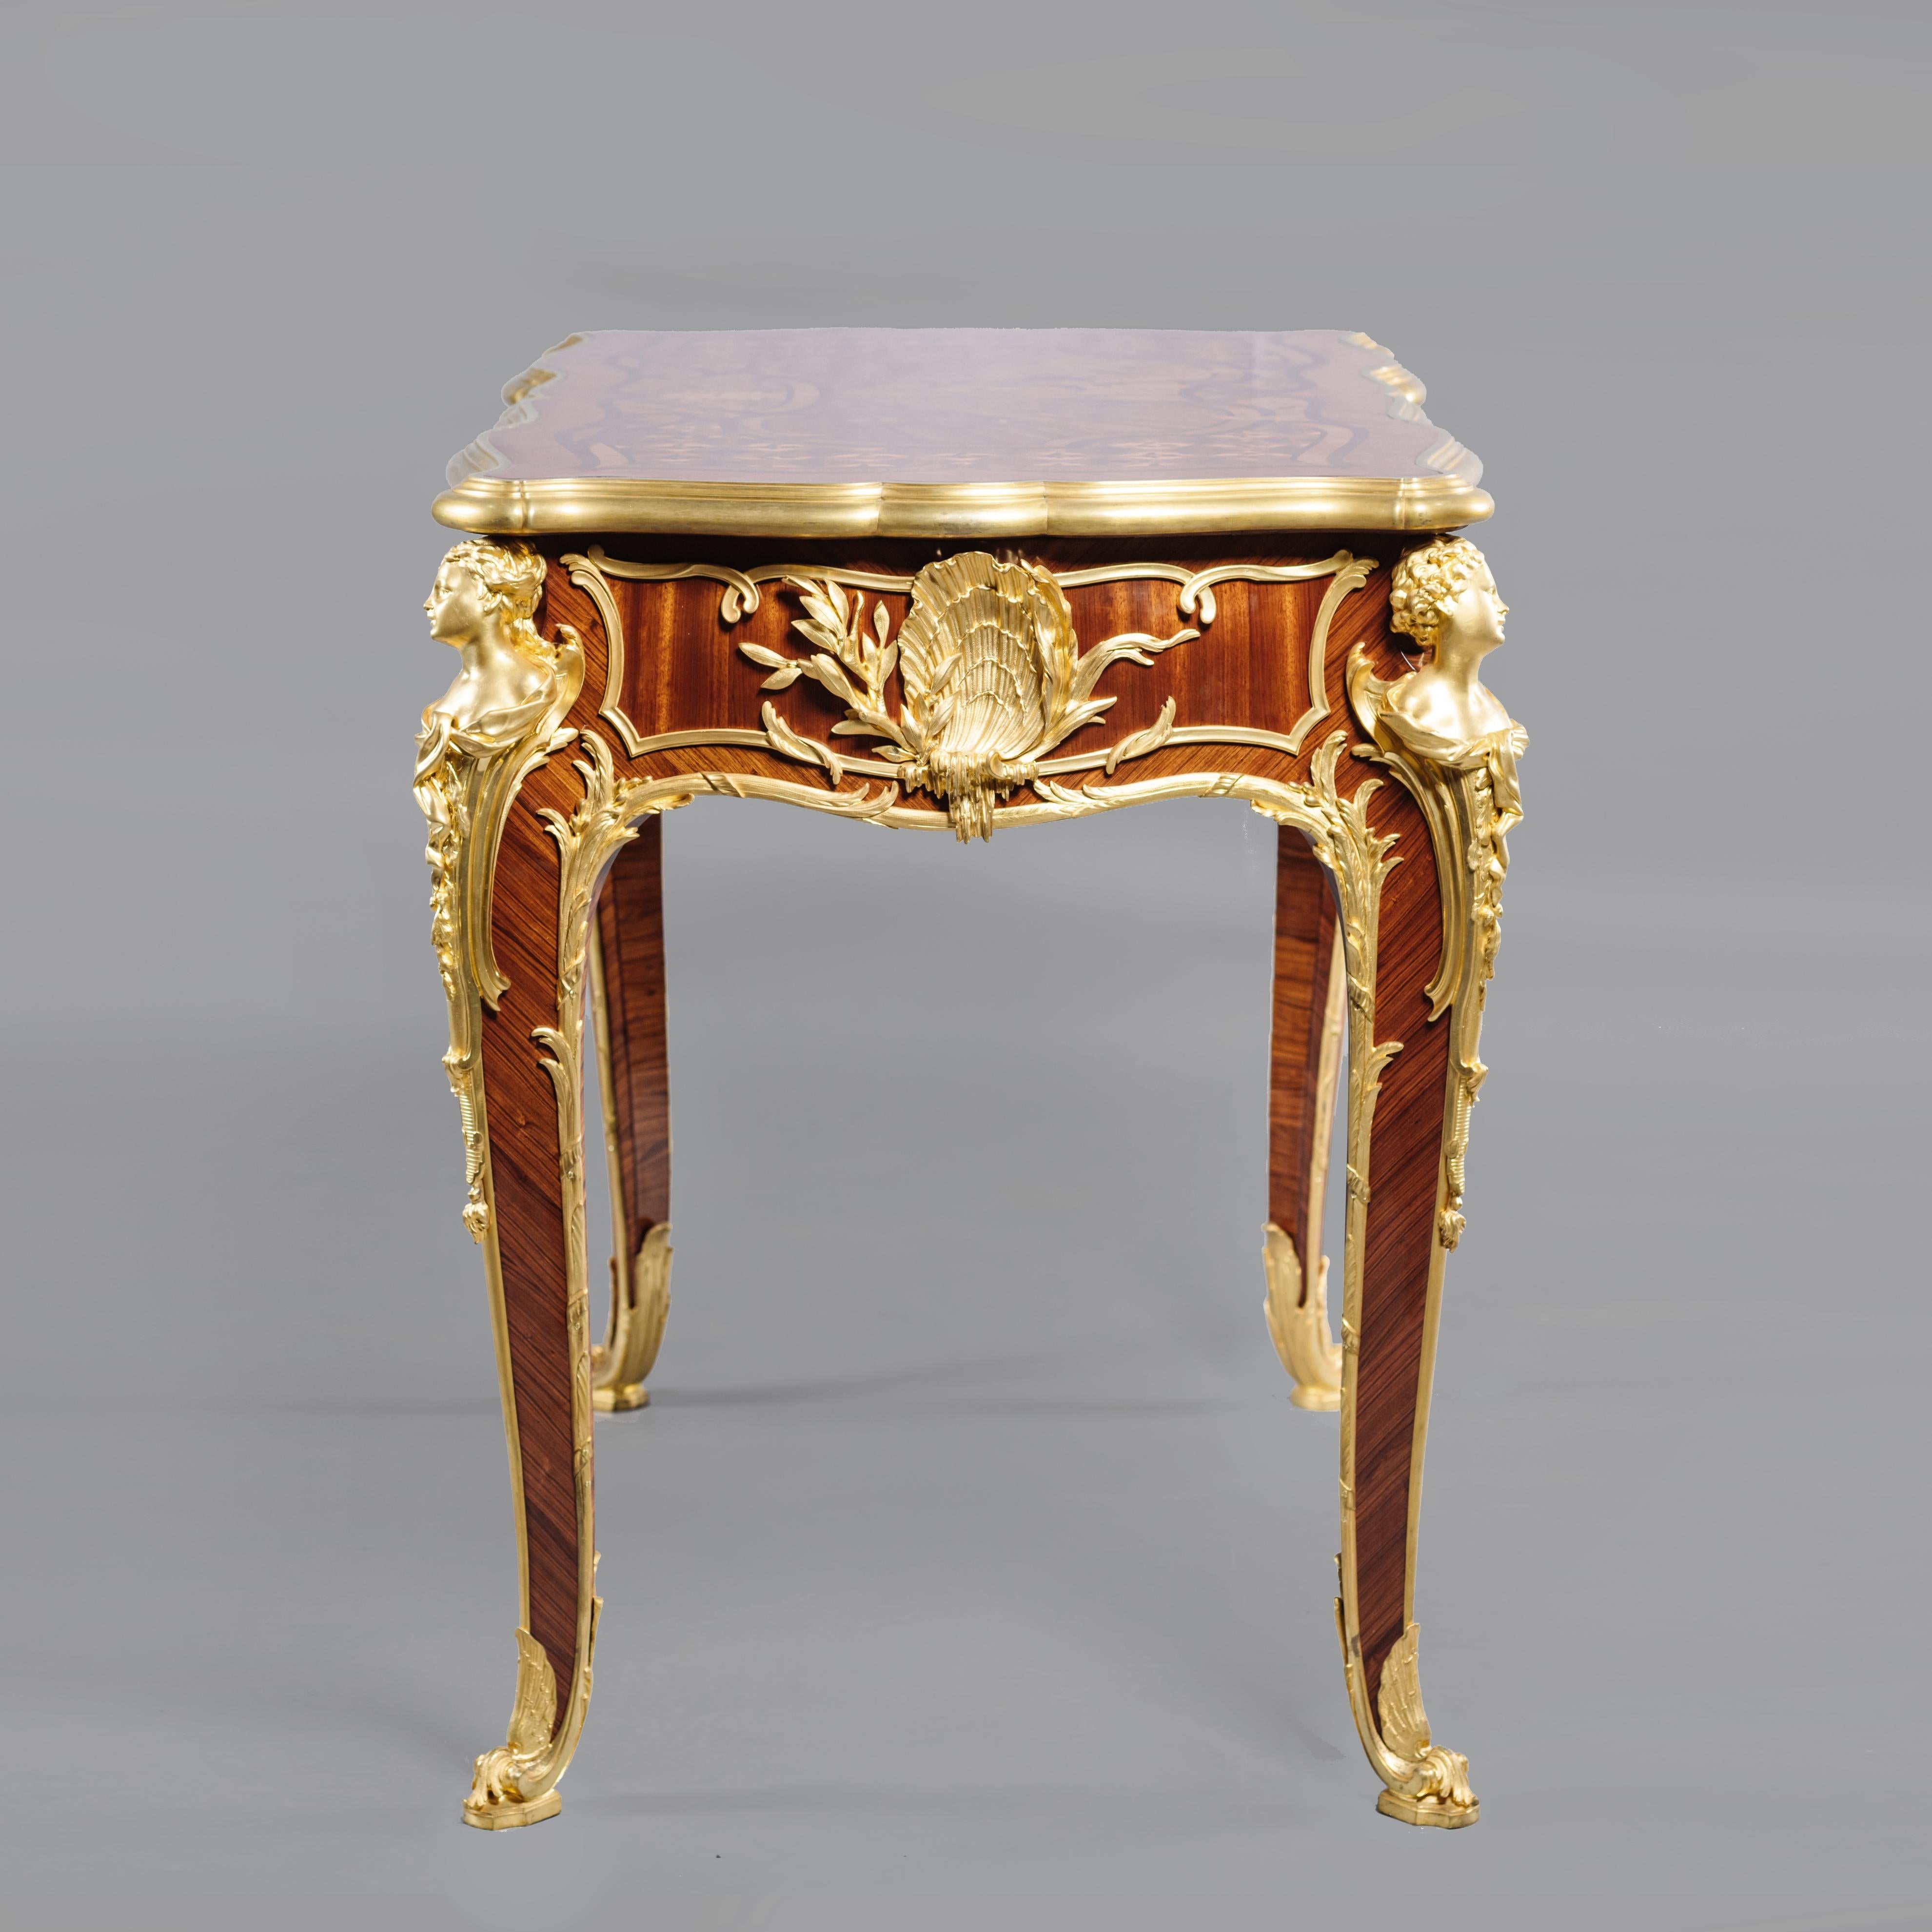 French Rare and Important Louis XV Style Gilt-Bronze Centre Table by François Linke For Sale